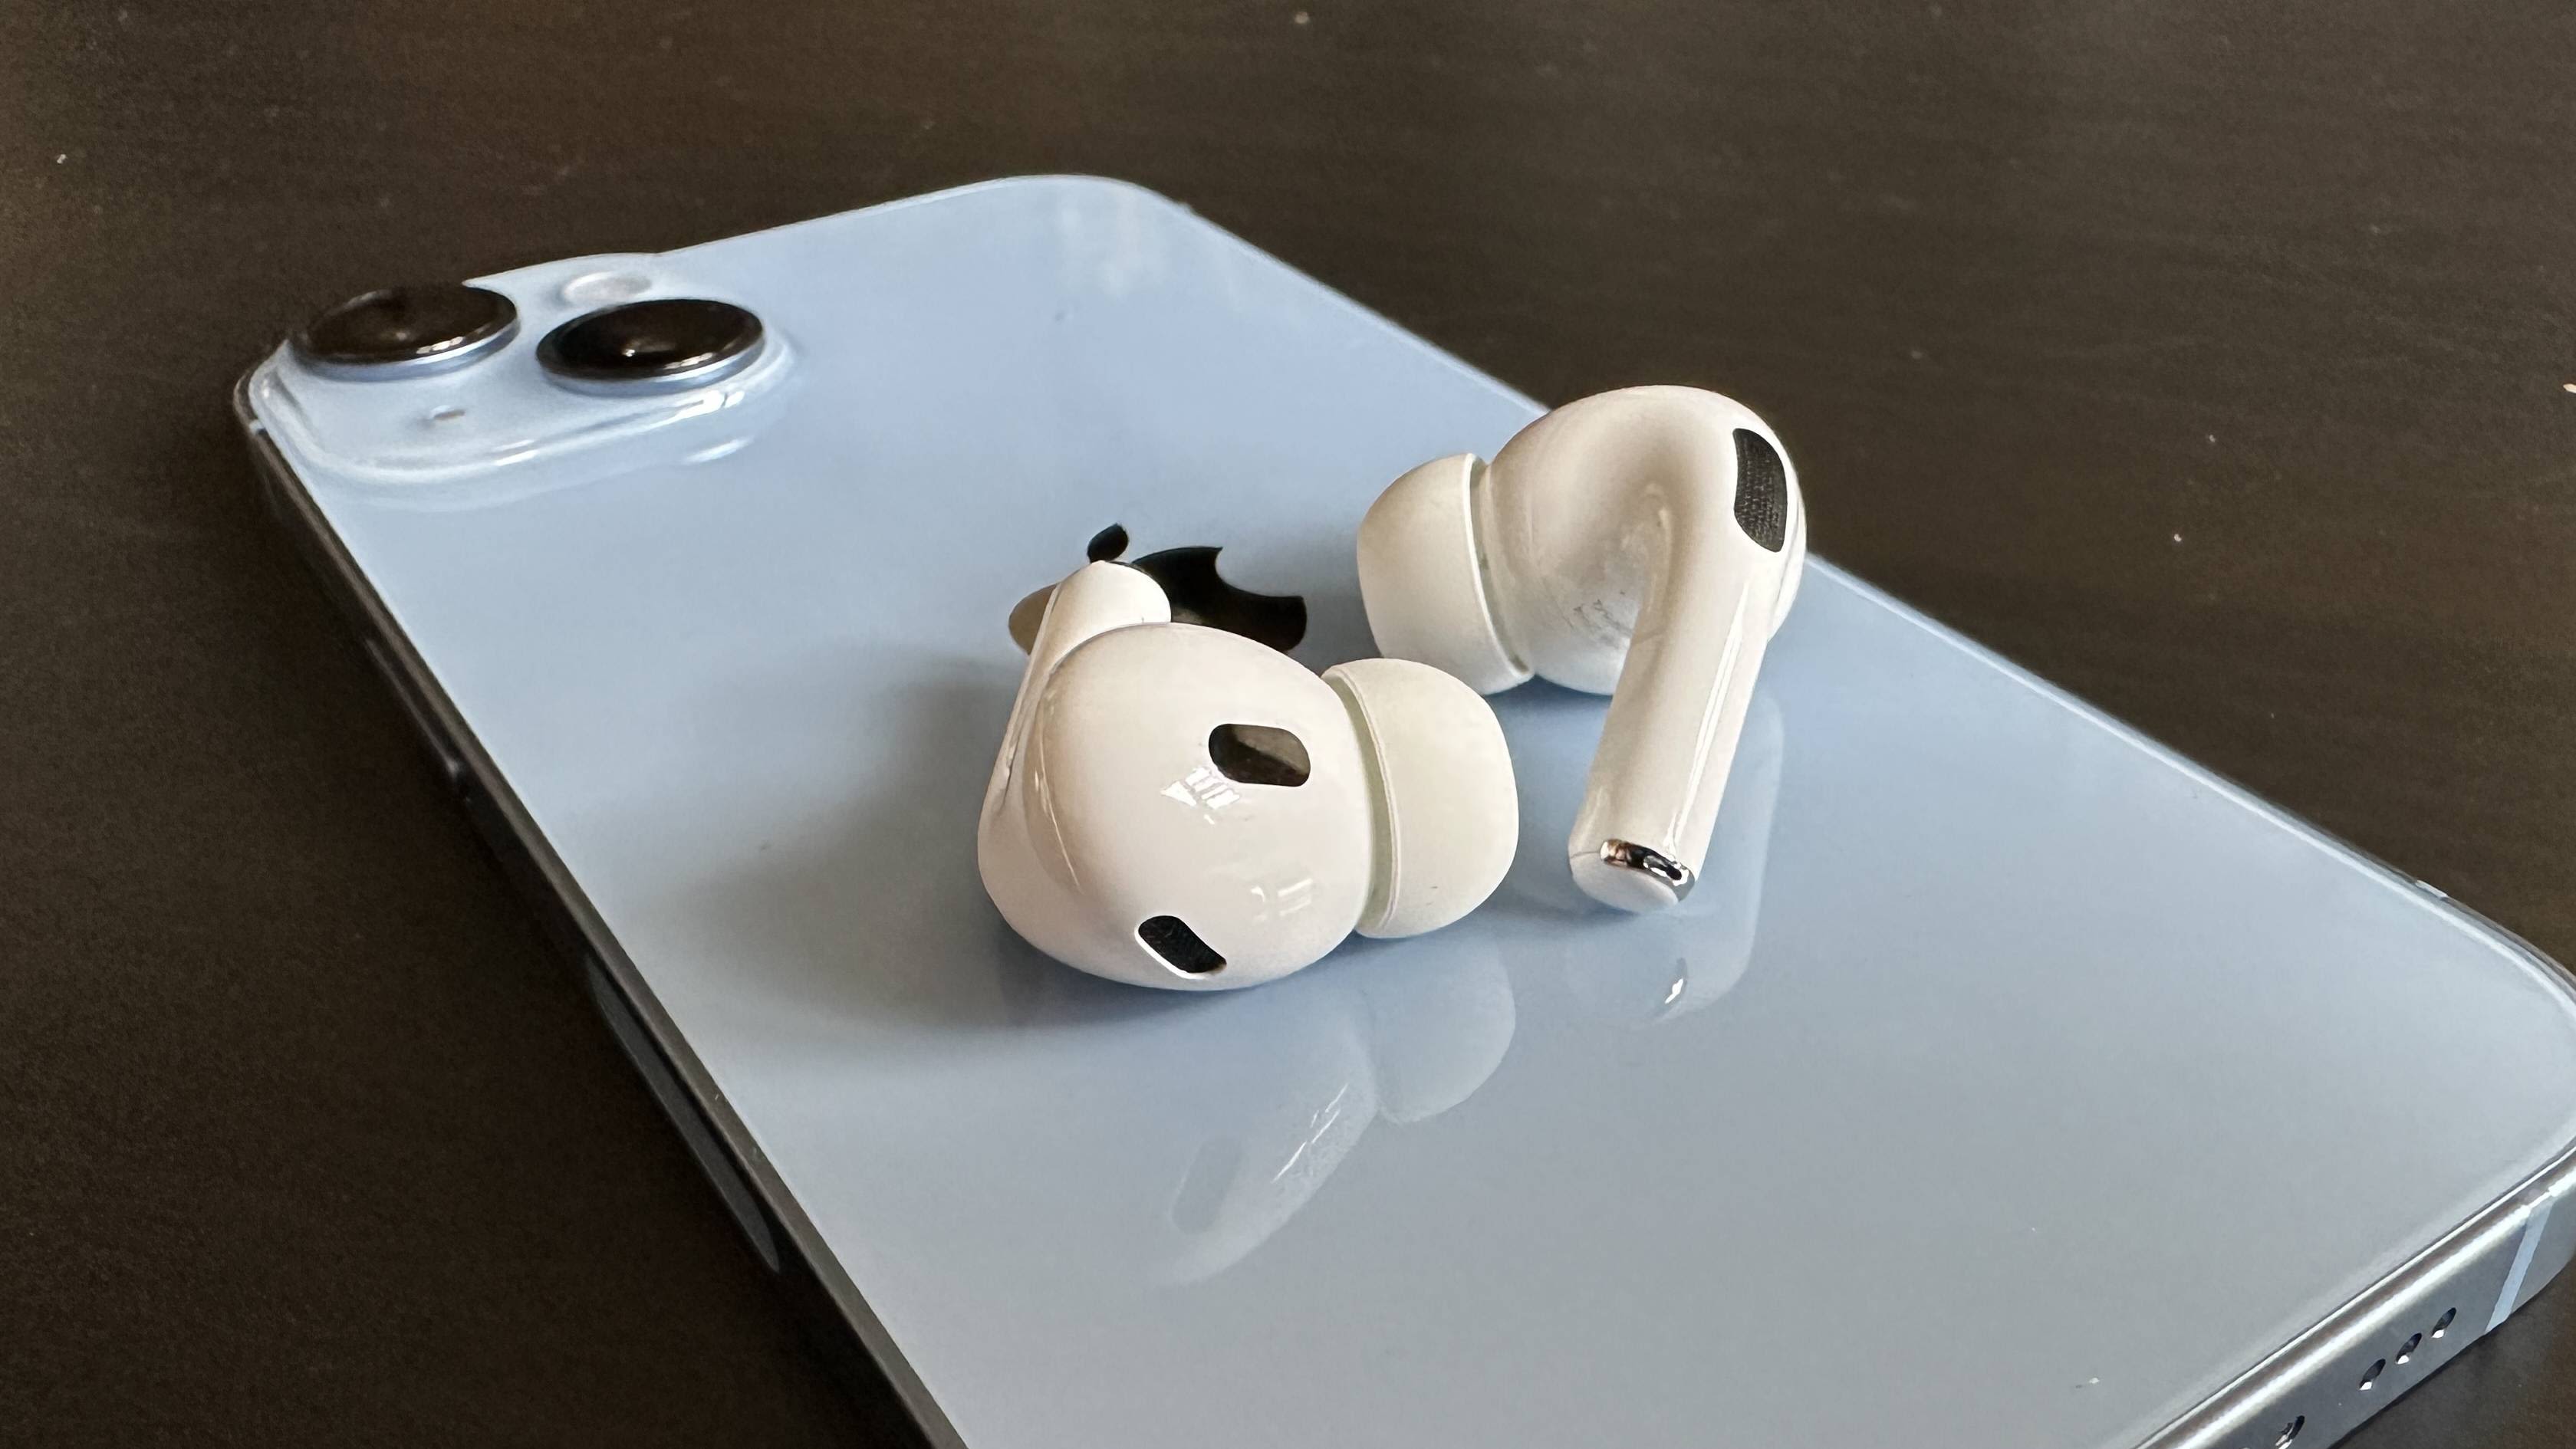 AirPods Pro 2nd-Gen Review: Better Noise Canceling, Easier to Find